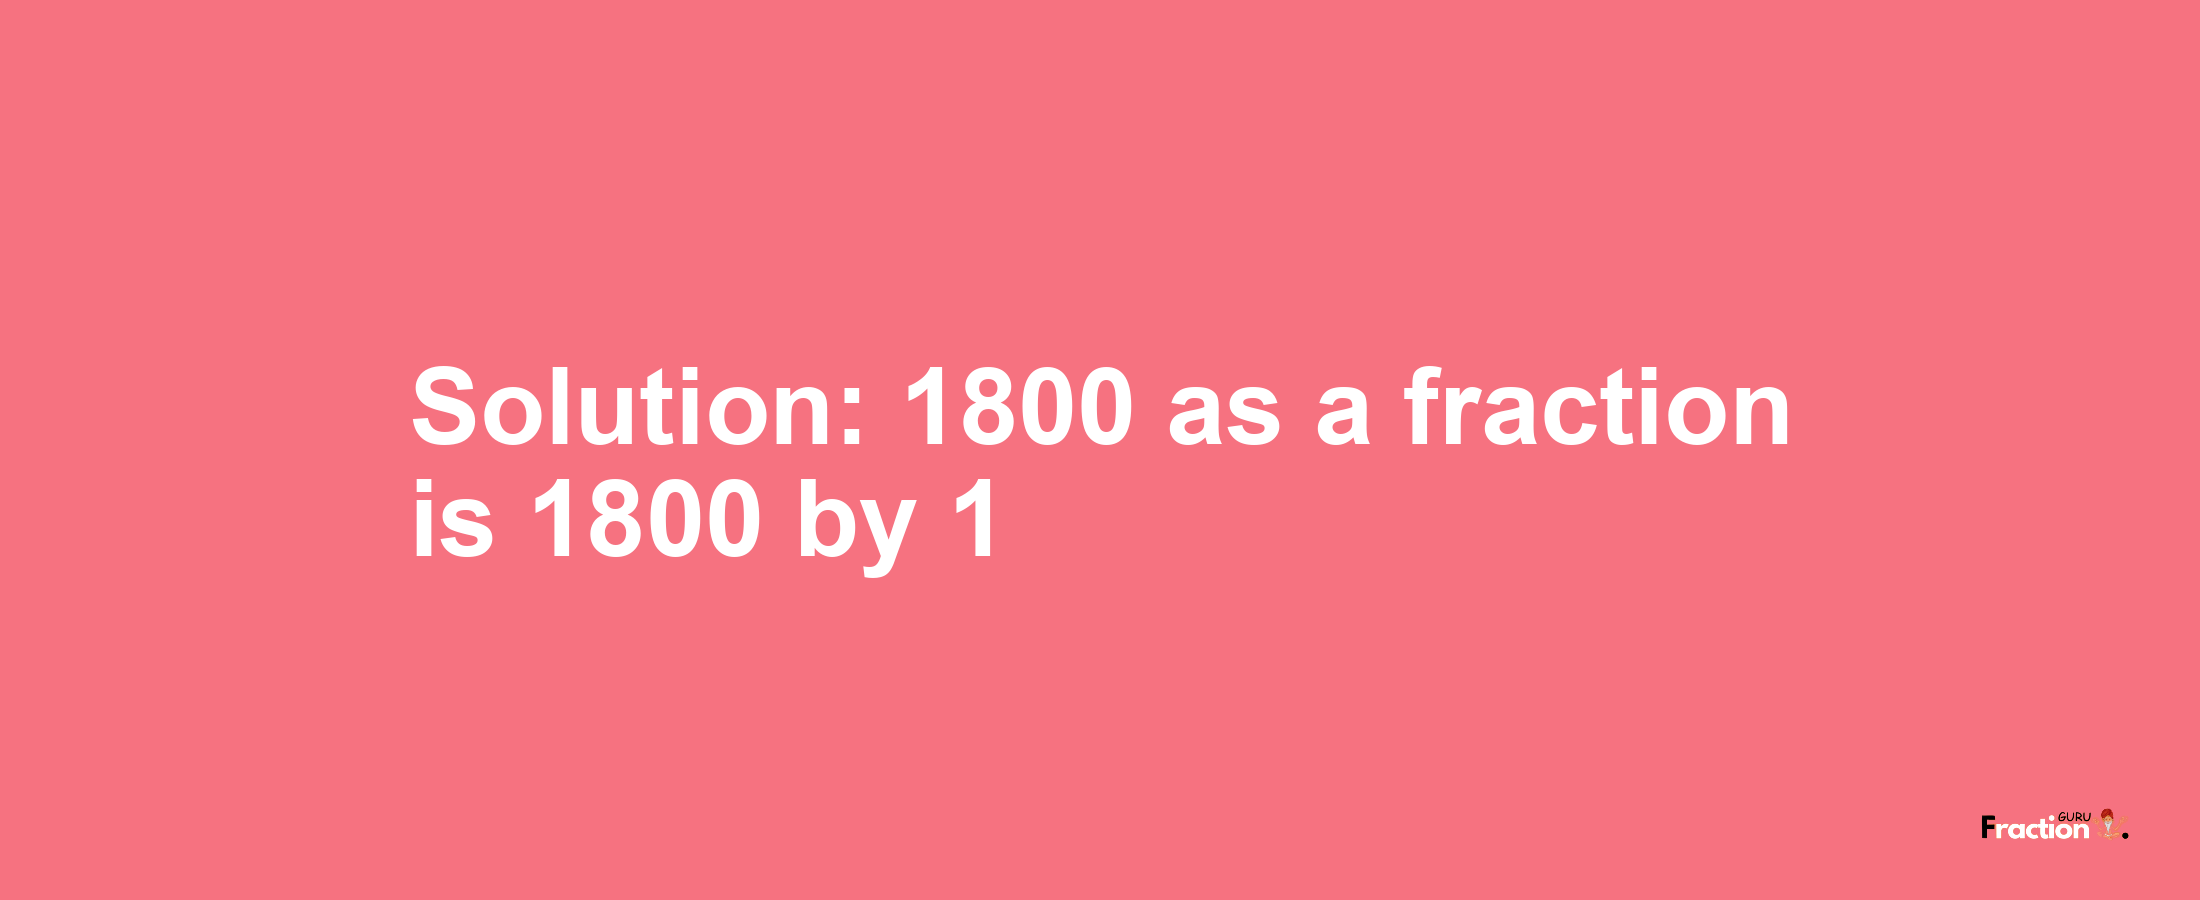 Solution:1800 as a fraction is 1800/1